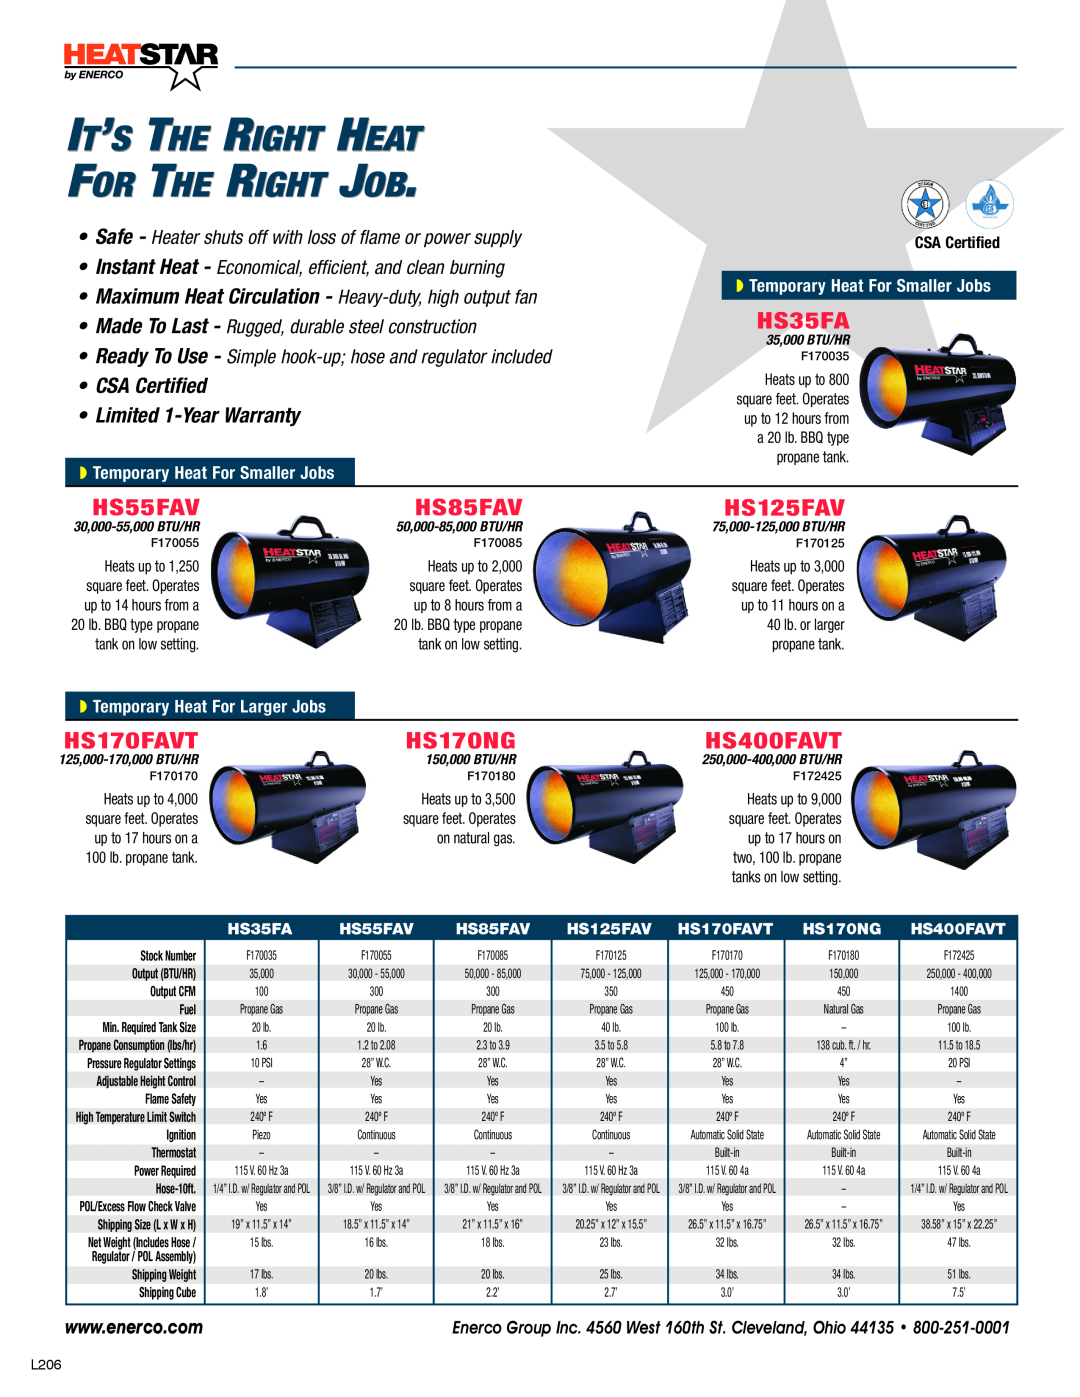 Enerco HS170FAVT manual It’S The Right Heat For The Right Job, HS35FA, HS55FAV, HS85FAV, HS125FAV, HS170NG, HS400FAVT 